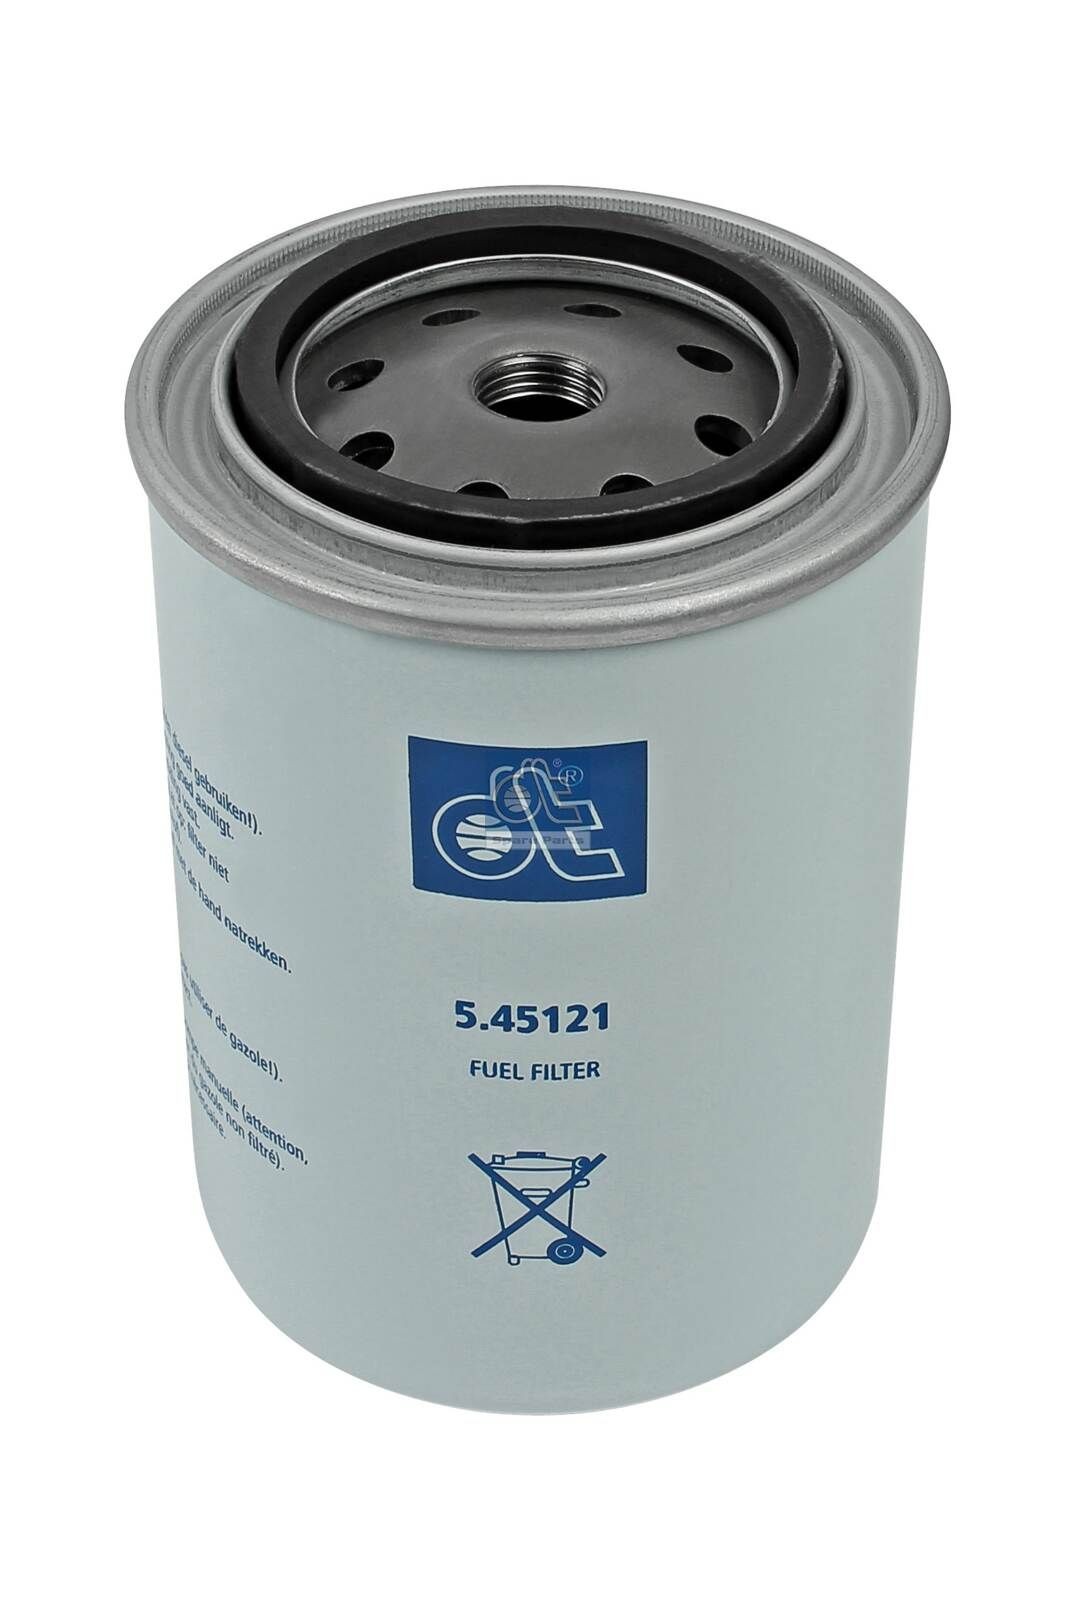 WDK 940/5 DT Spare Parts 5.45121 Fuel filter 247139